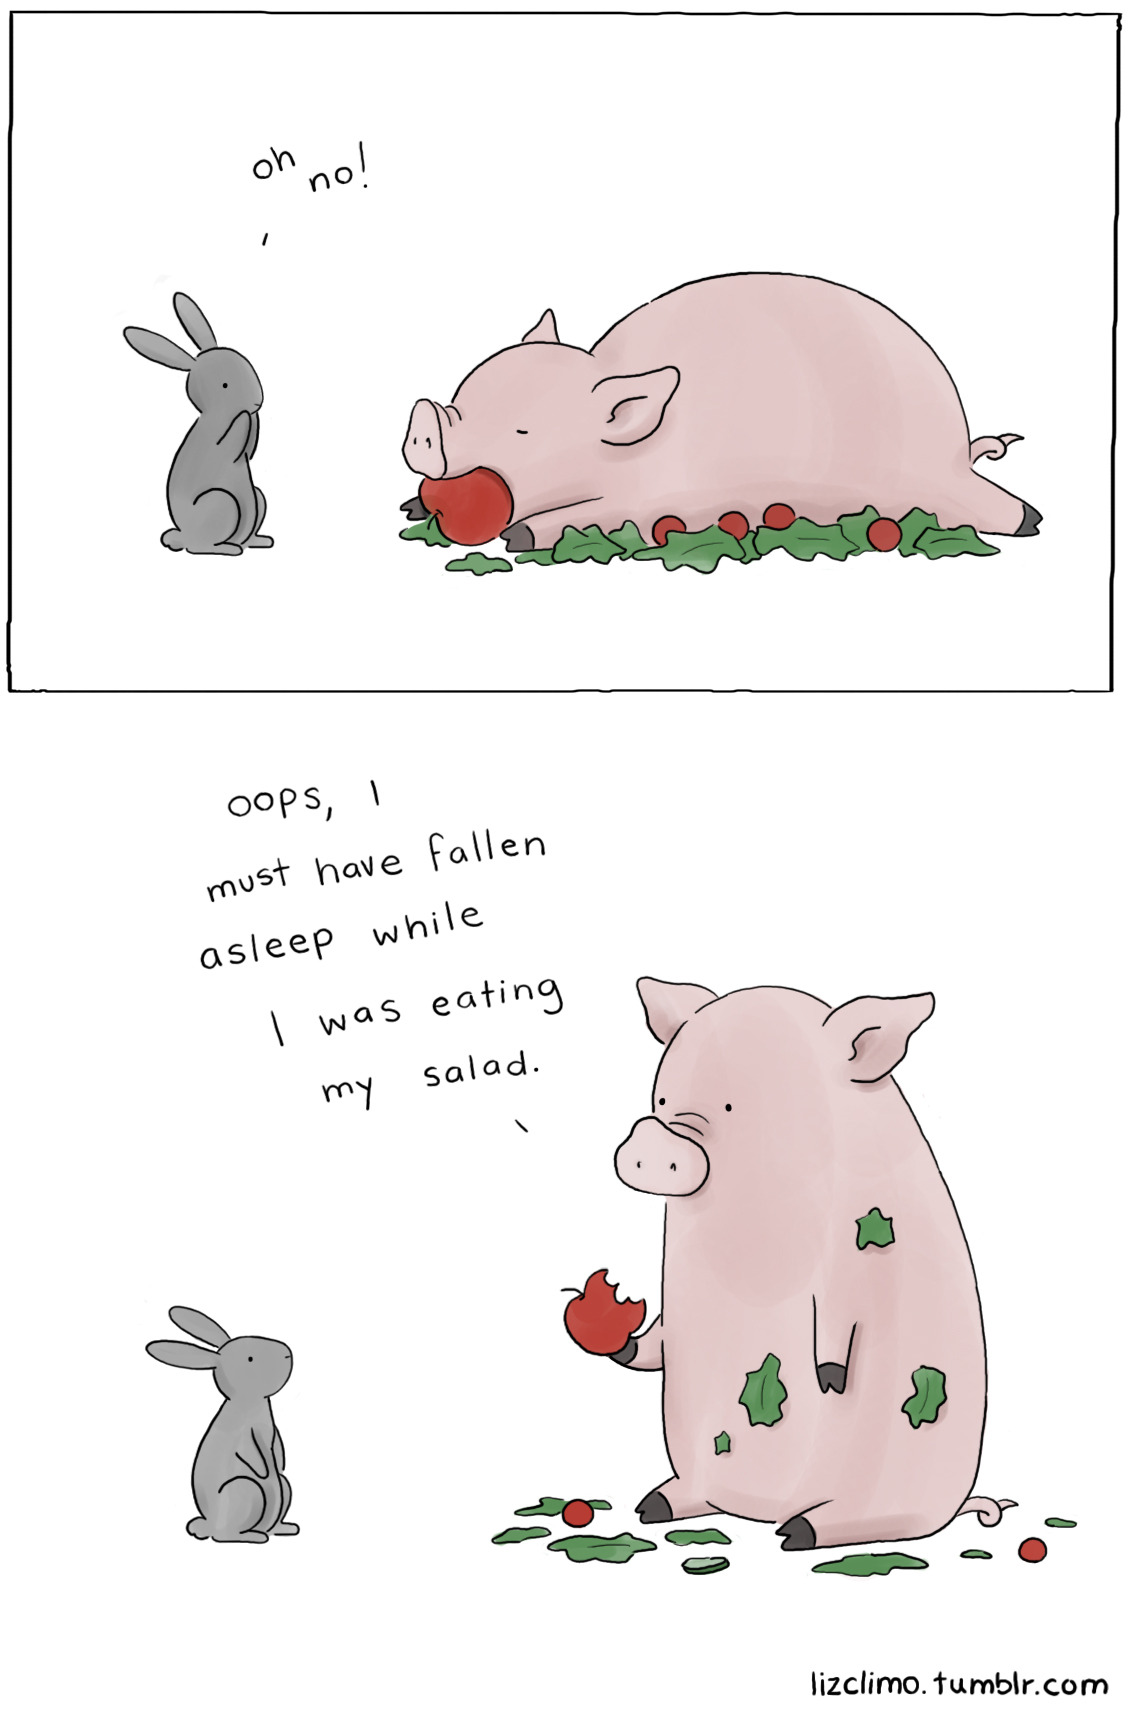 i love salad.
(exclusive comic for the fluffington post!)